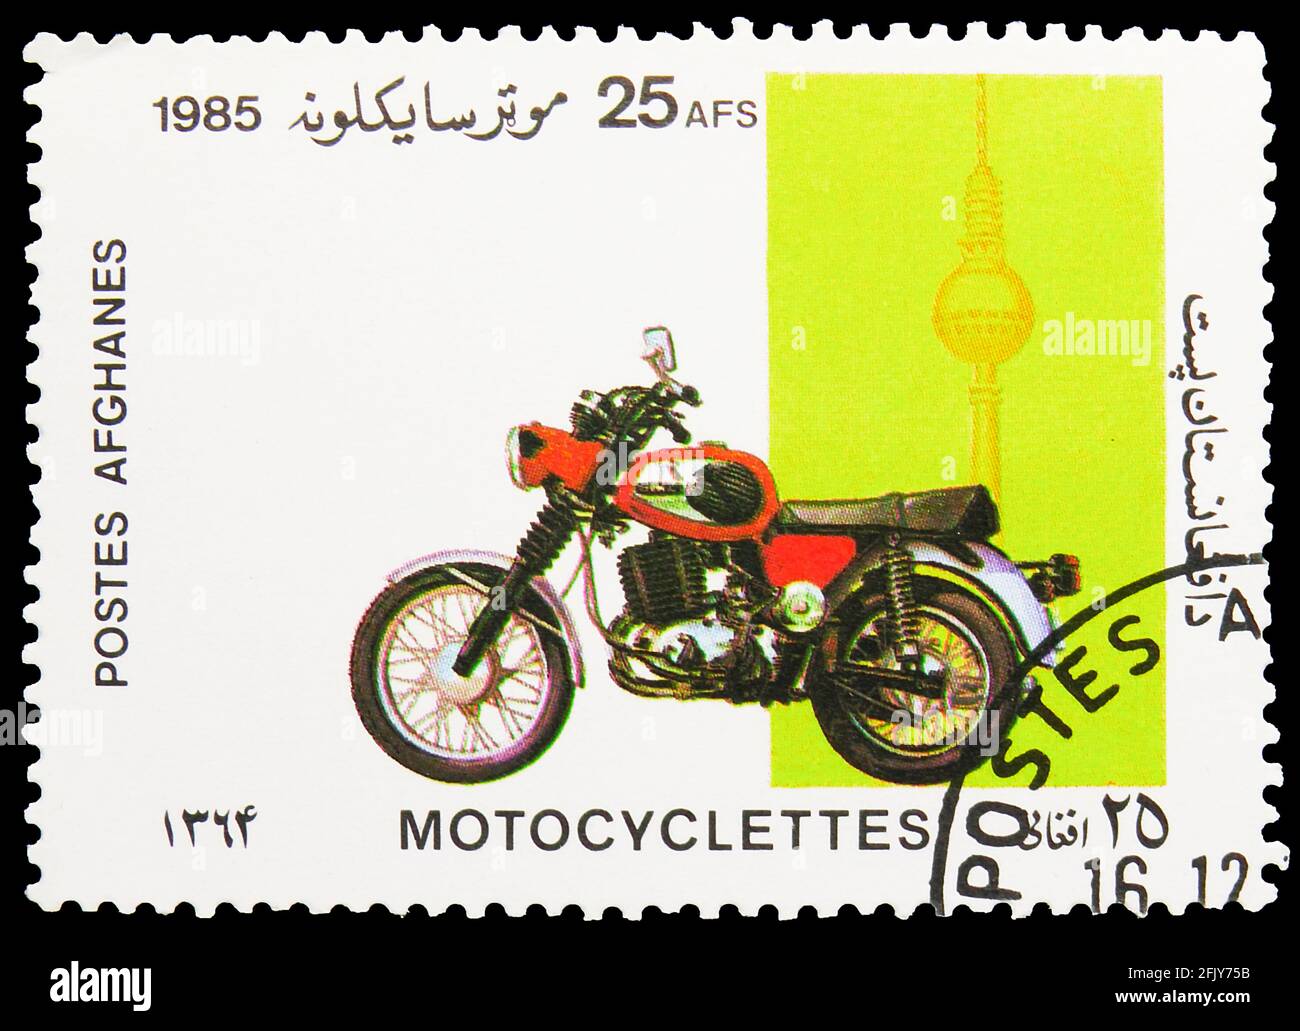 MOSCOW, RUSSIA - NOVEMBER 16, 2019: Postage stamp printed in Afghanistan shows MZ motorcycle and T.V. Tower, Berlin, Motorcycles serie, circa 1985 Stock Photo